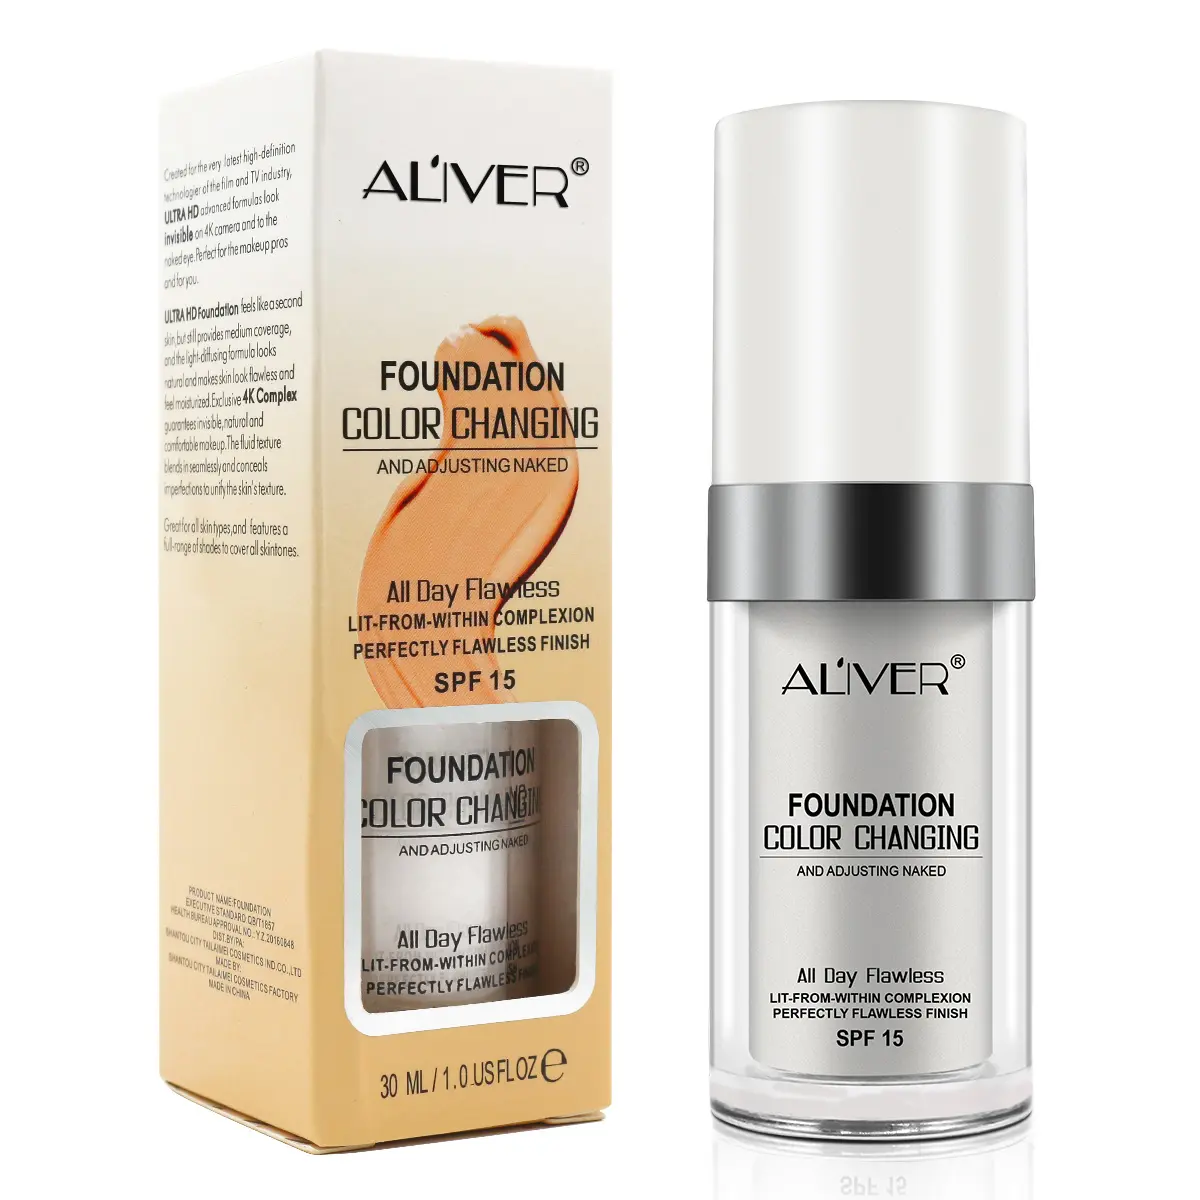 ALIVER Moisturizing Long-wearing Silky Sunscreen Spf 15 Magic Color Changing Liquid Foundation